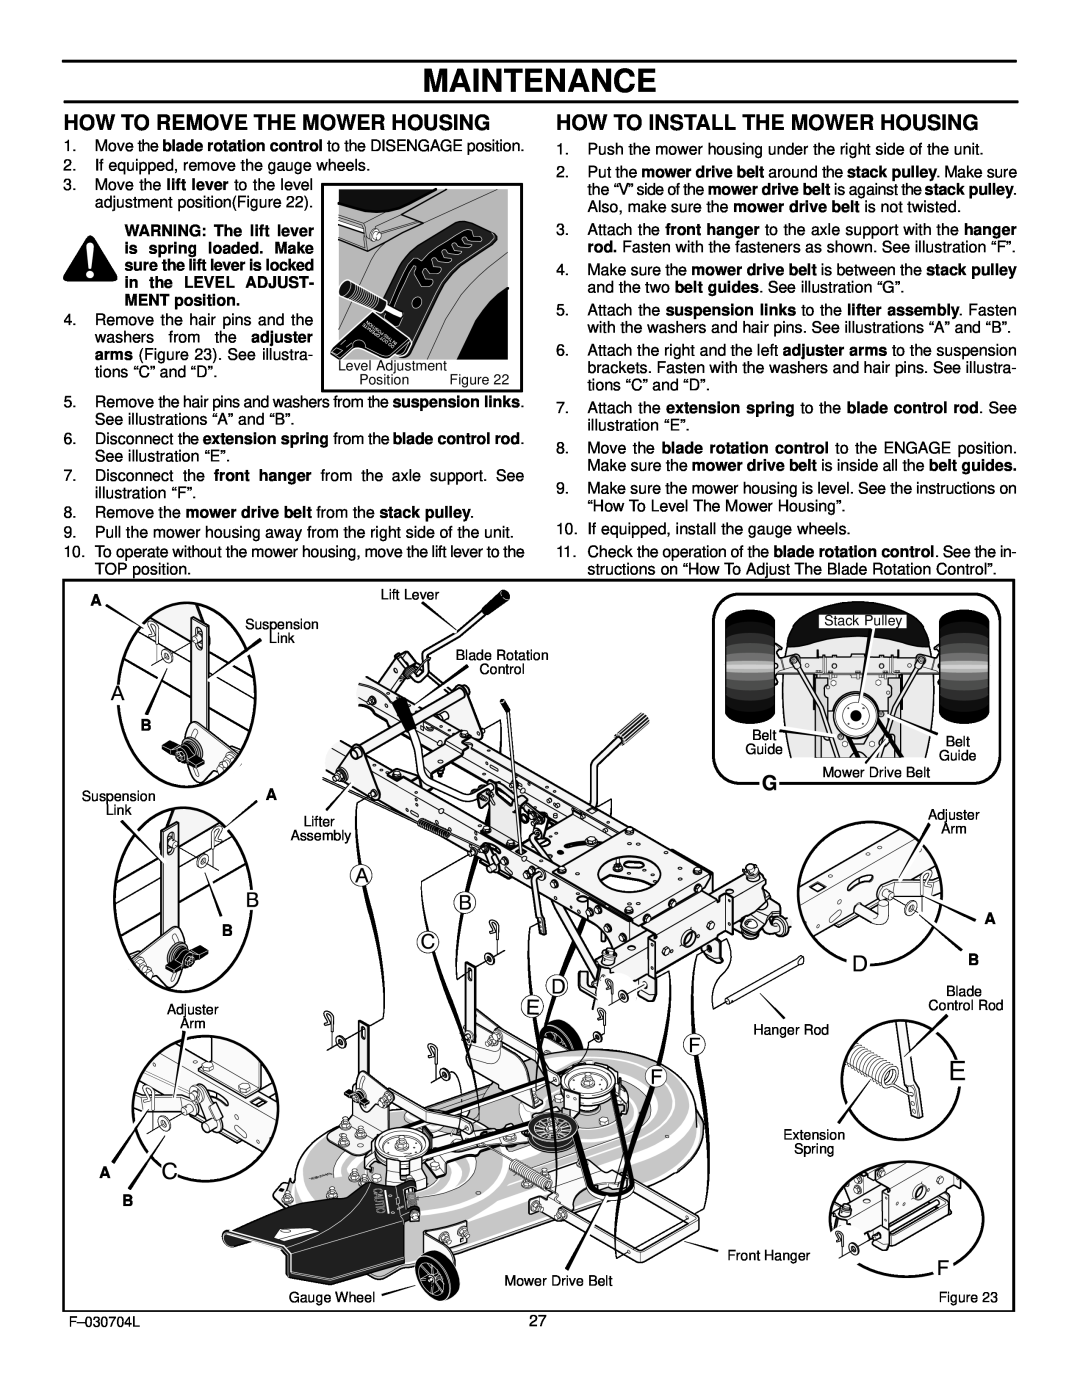 Murray 425303x92B manual Maintenance, How To Remove The Mower Housing, How To Install The Mower Housing 